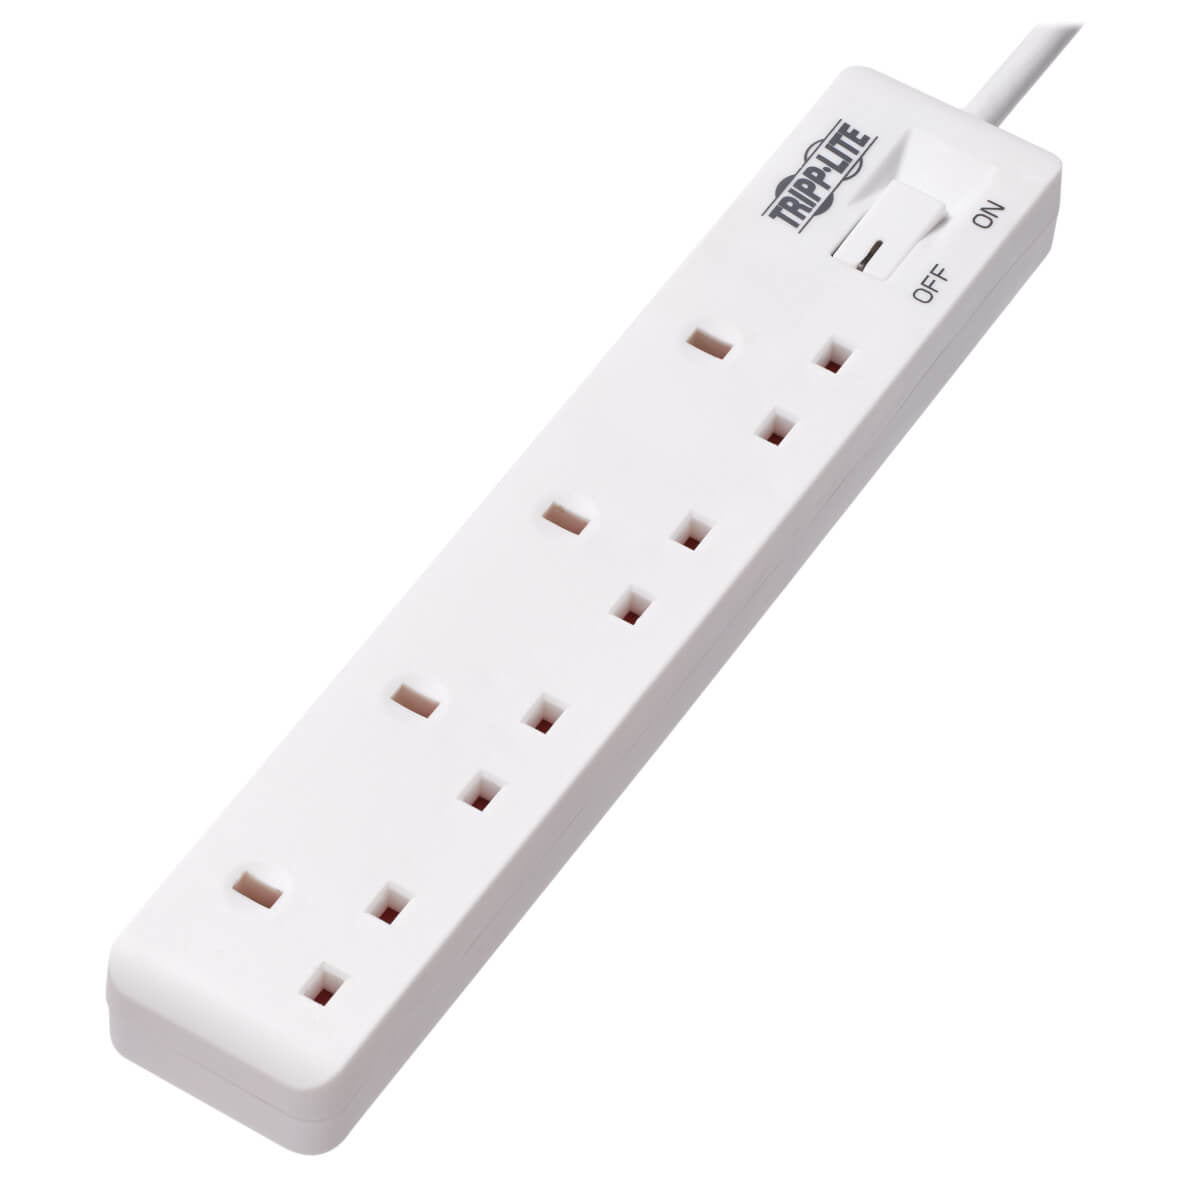 PS4B18 4-Outlet Power Strip - British BS1363A Outlets